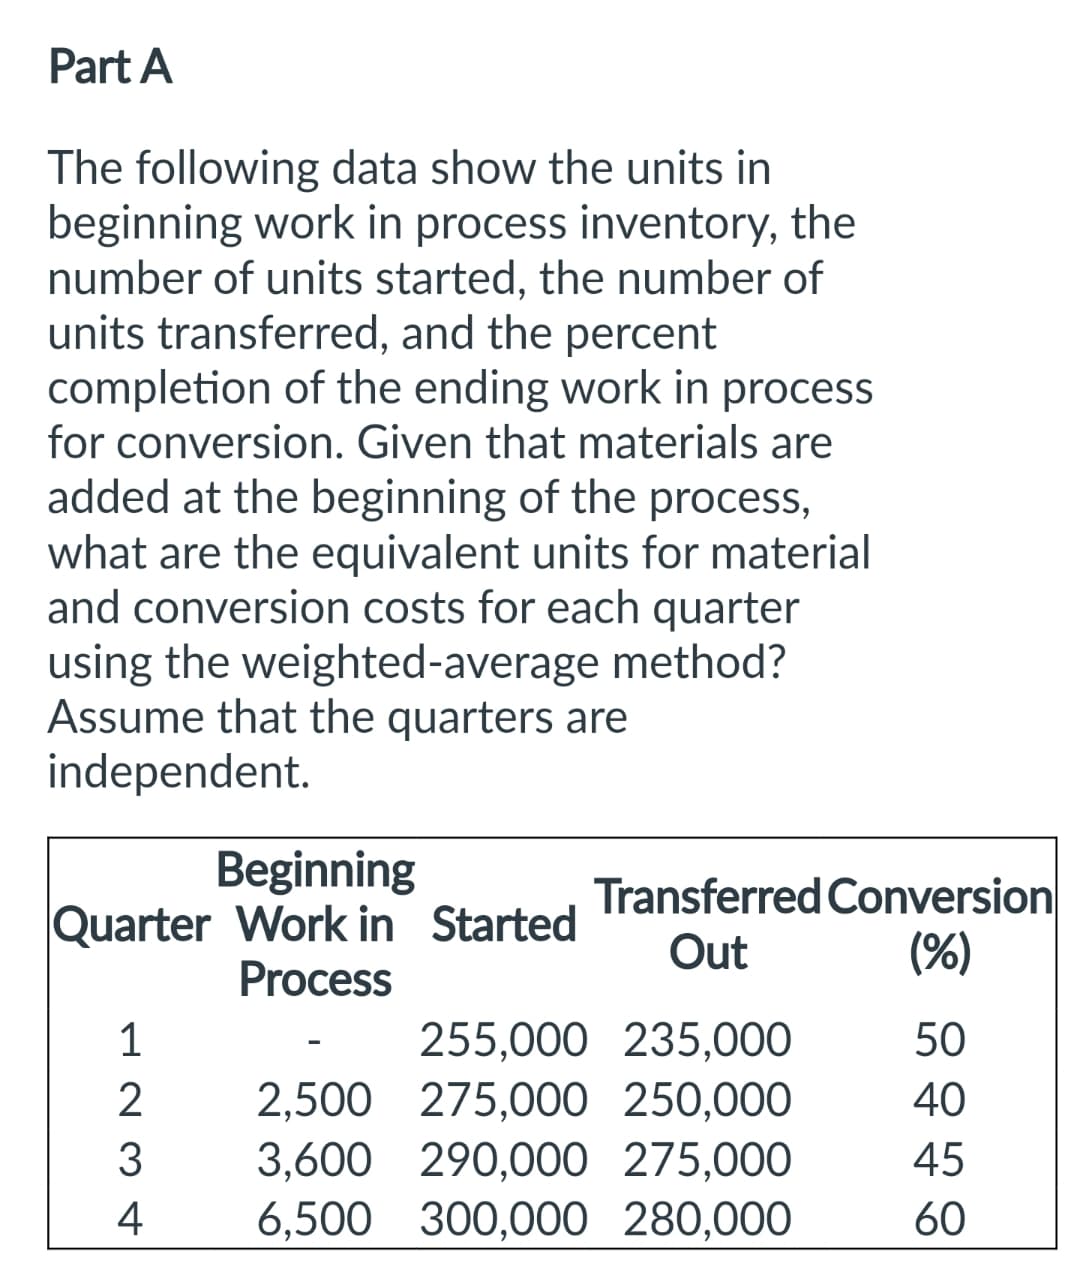 Part A
The following data show the units in
beginning work in process inventory, the
number of units started, the number of
units transferred, and the percent
completion of the ending work in process
for conversion. Given that materials are
added at the beginning of the process,
what are the equivalent units for material
and conversion costs for each quarter
using the weighted-average method?
Assume that the quarters are
independent.
Beginning
Quarter Work in Started
Process
123 +
2
4
255,000
2,500 275,000
3,600 290,000
6,500 300,000
Transferred Conversion
Out
(%)
235,000
250,000
275,000
280,000
50
40
45
60